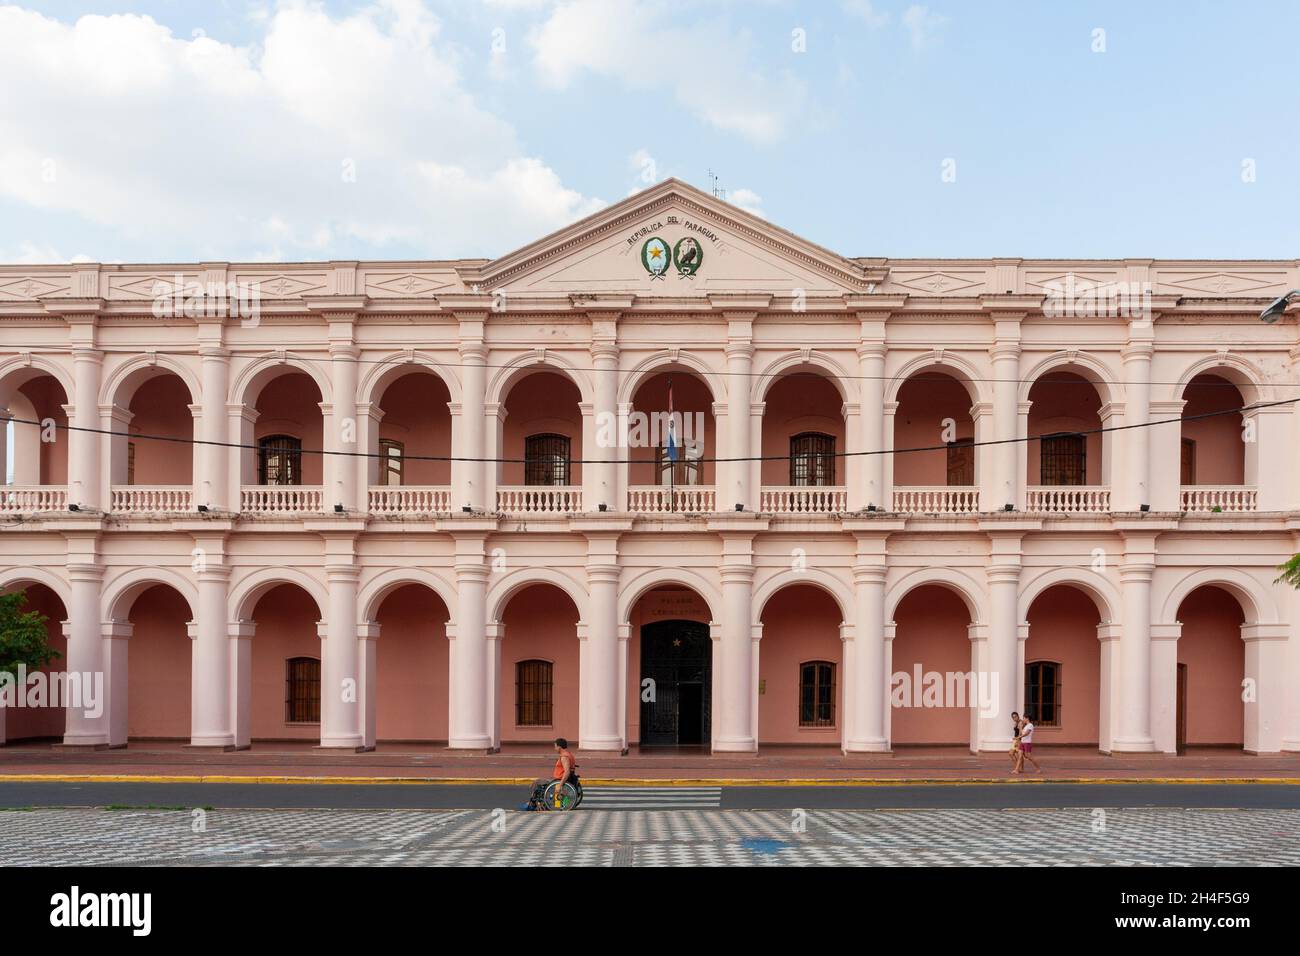 Asuncion, Paraguay. 10th March, 2010. View of a man in a wheelchair passing in front of the 'Centro Cultural de la Republica' (Cultural Center of the Republic) which operates in the building of the former 'Cabildo' (Town Council). The building was also place of the National Congress. It was built in 1844 to be seat of the Executive and Legislative Branch. Stock Photo